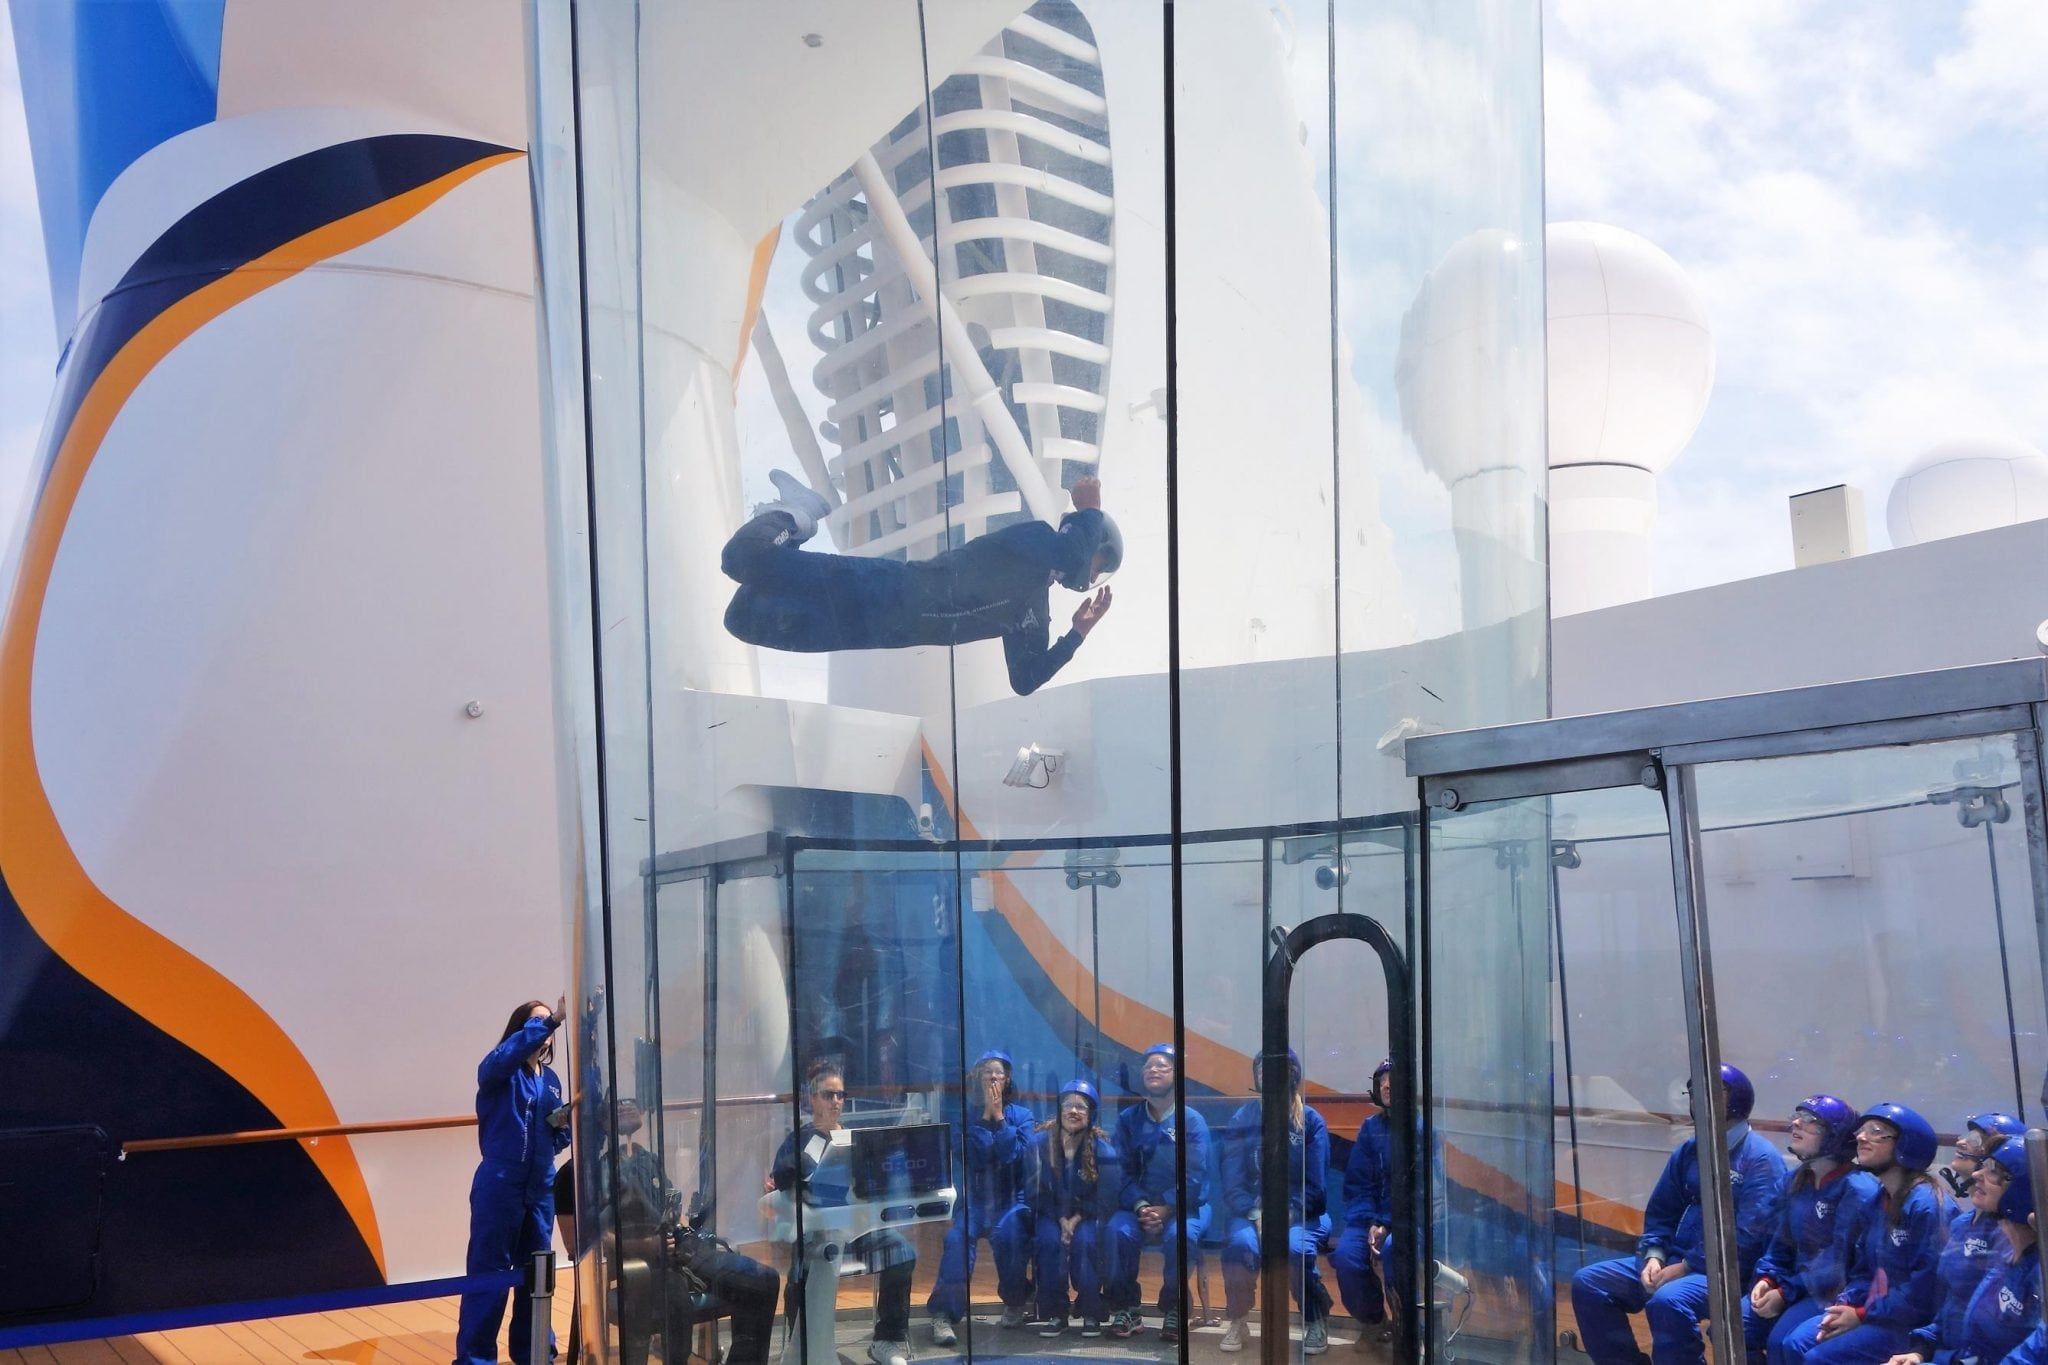 Ripcord by iFLY on Anthem of the Seas